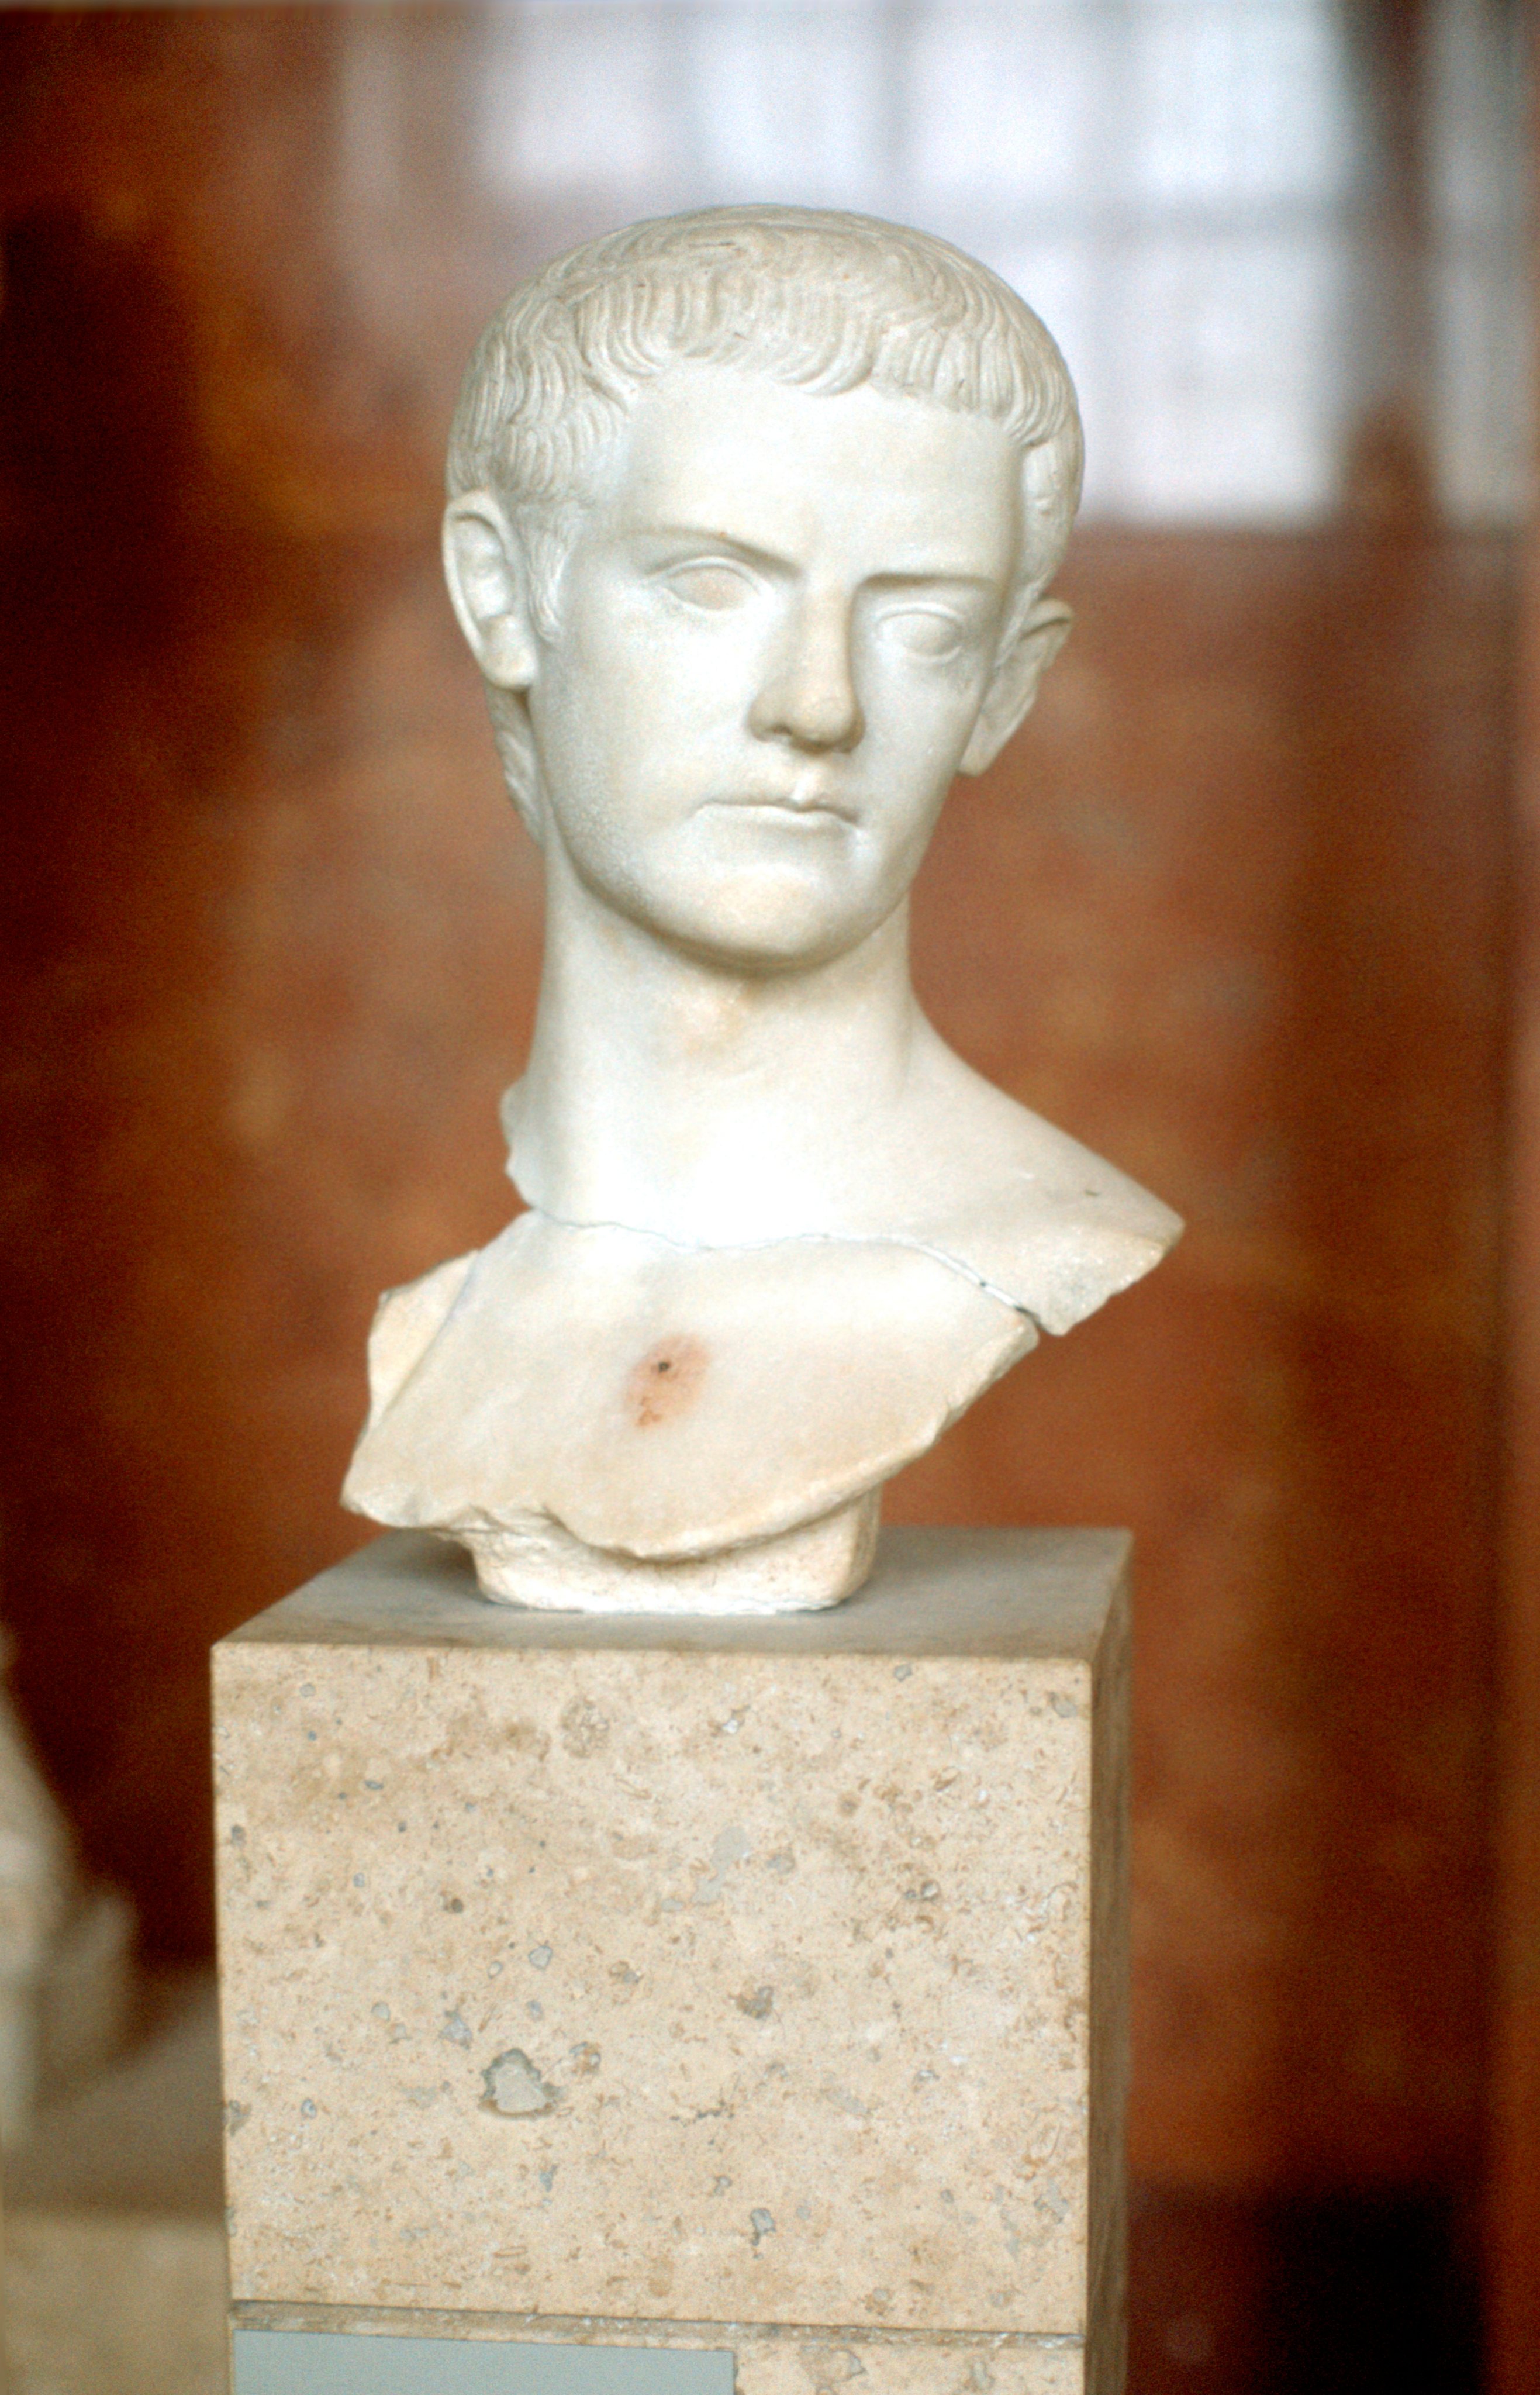 Marble bust of the Emperor Caligula.